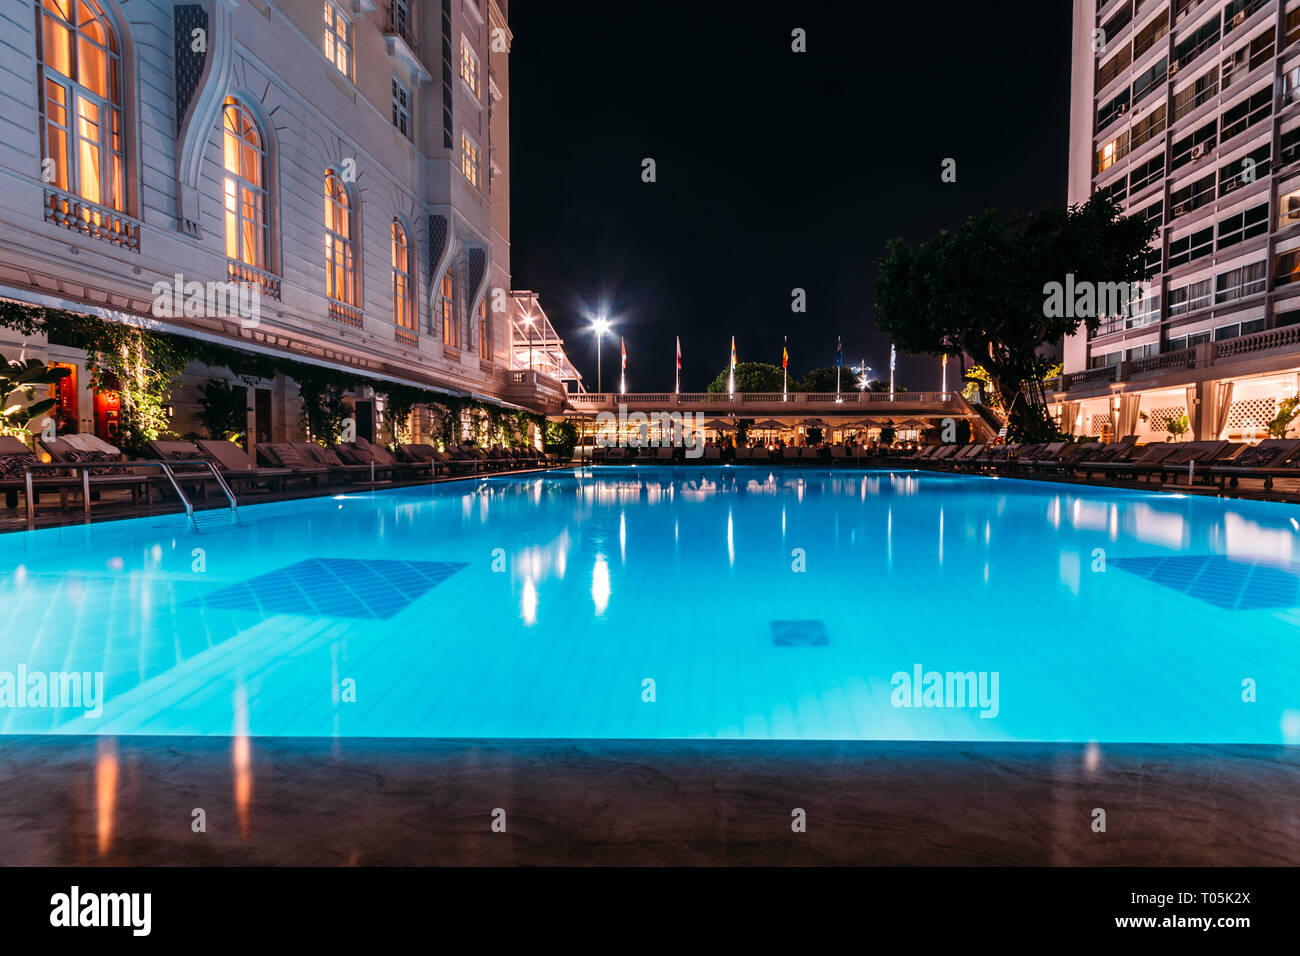 Rio de Janeiro, Brazil, March 17, 2019: Poolside bar and lounge chairs at luxurious Copacabana Palace Belmond in Copacabana, Rio de Janeiro, Brazil Stock Photo